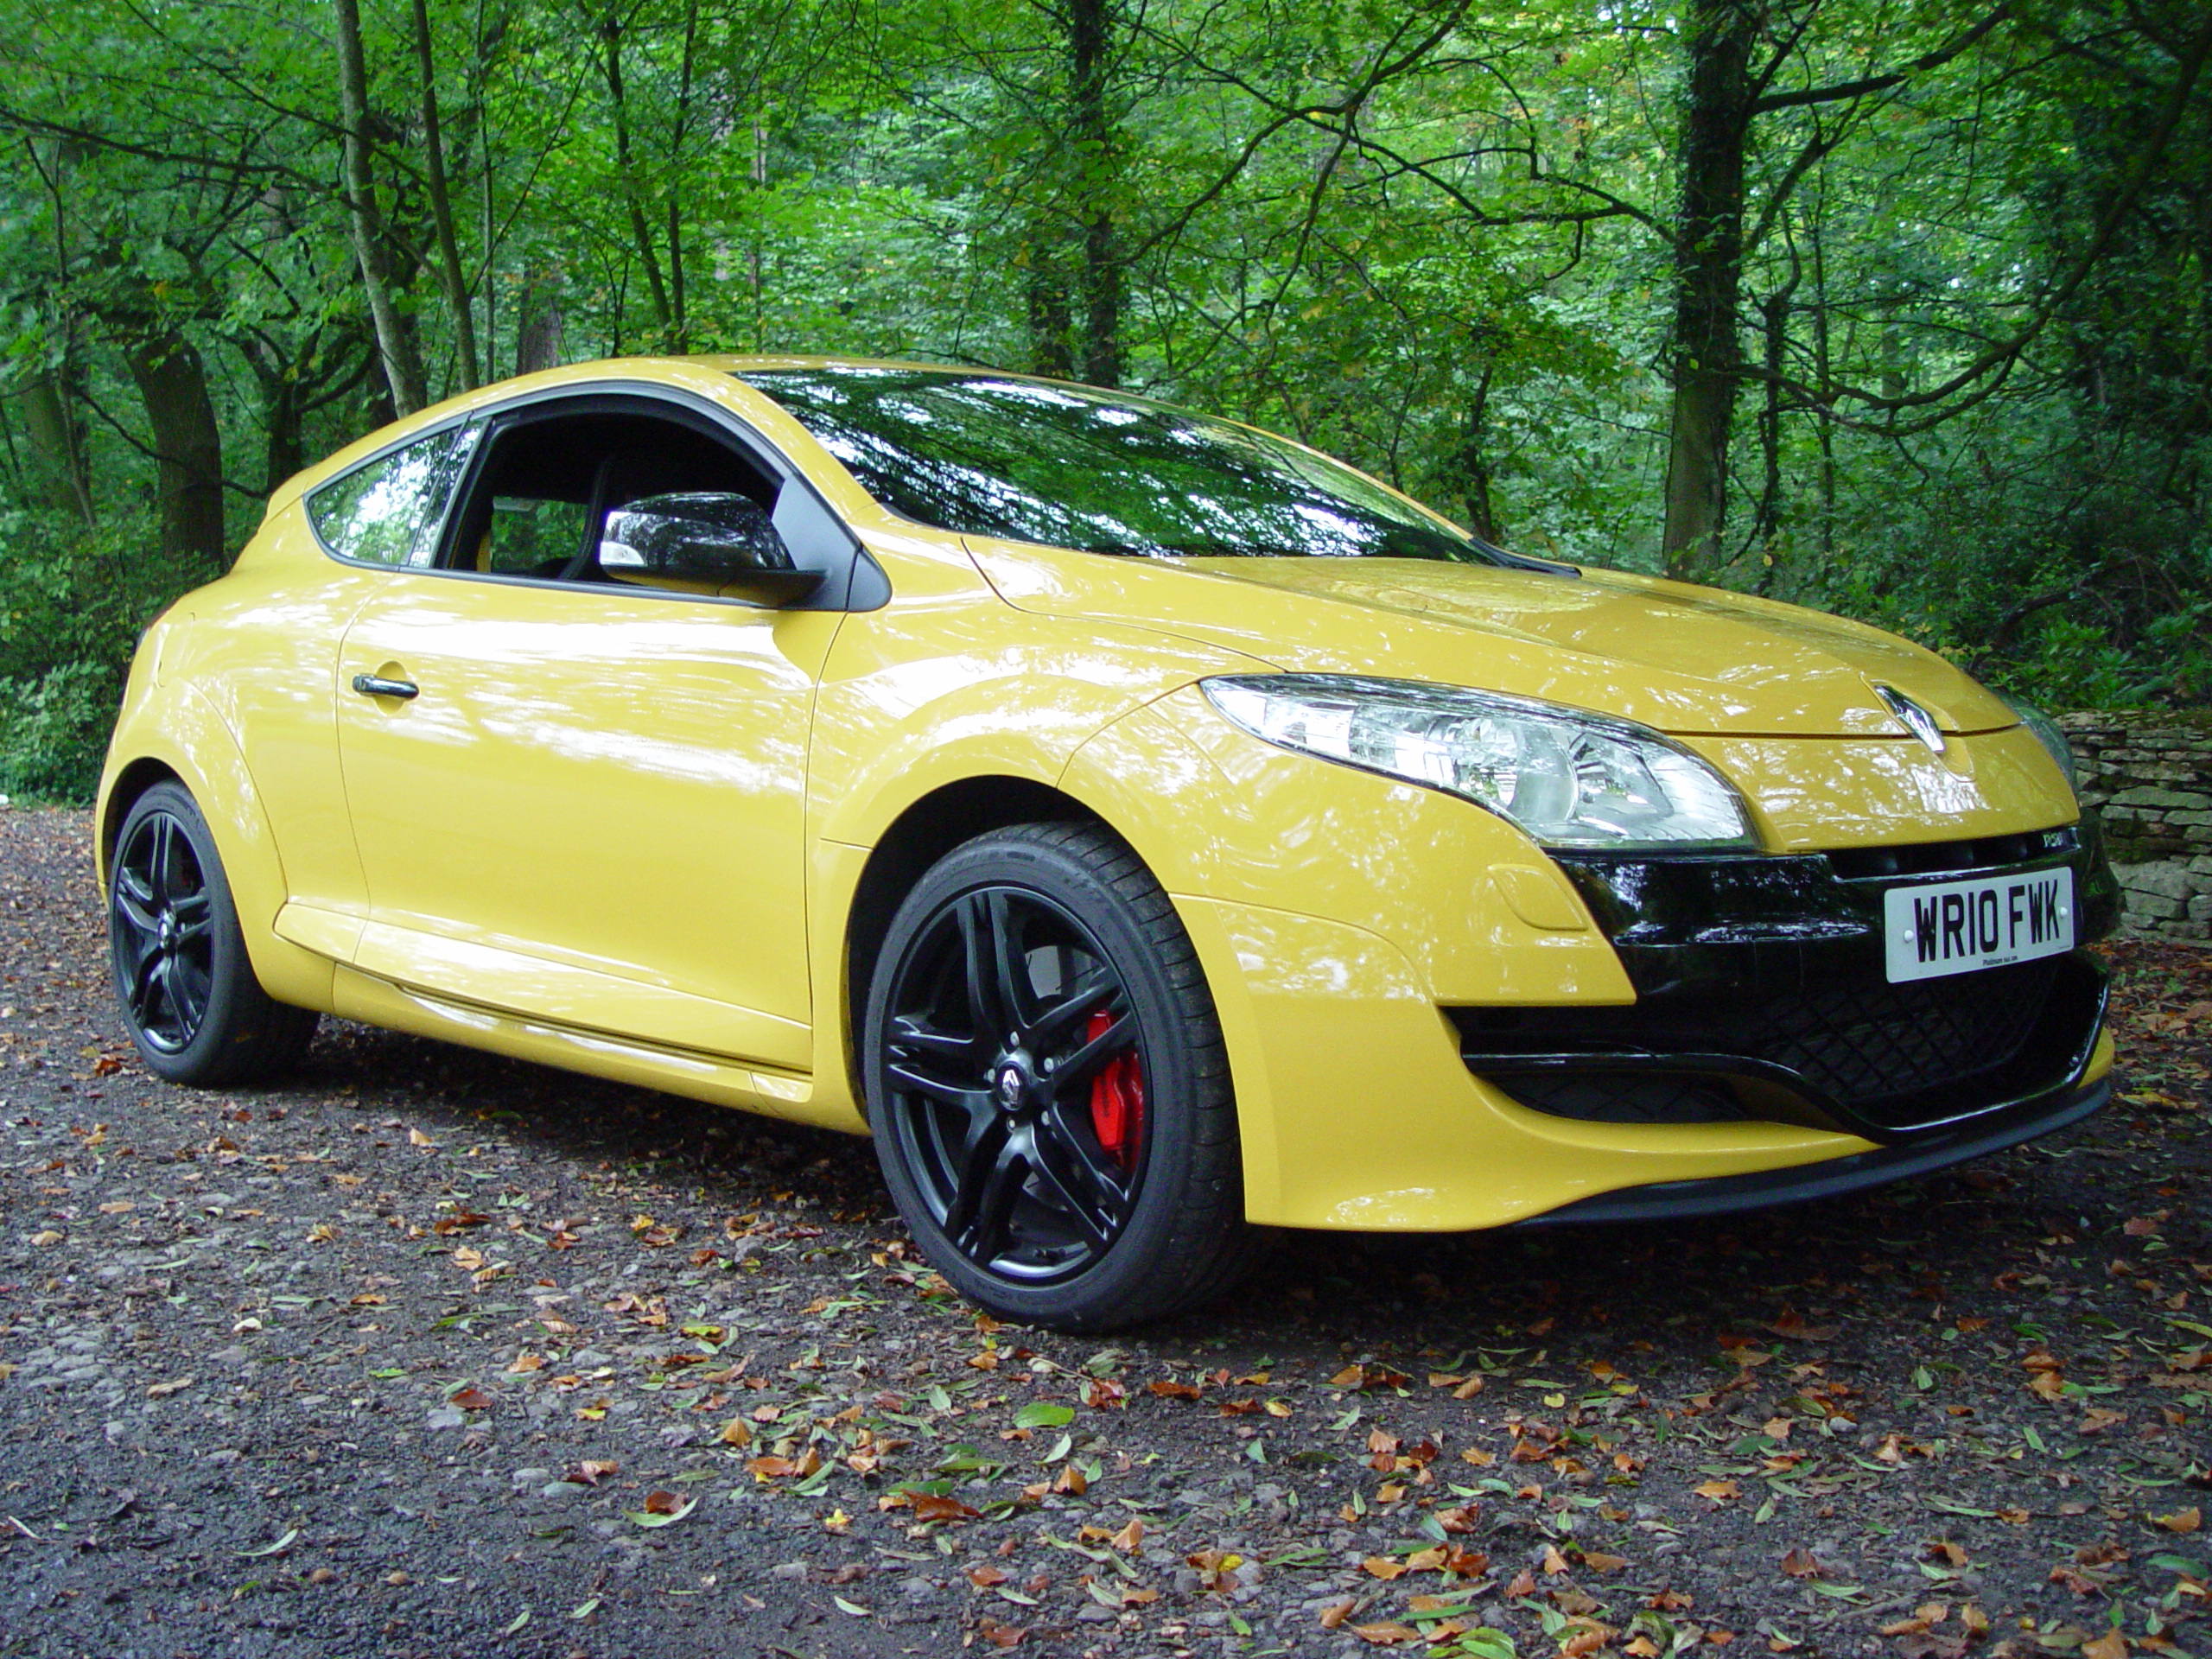 Megane 250RS certainly looks the part